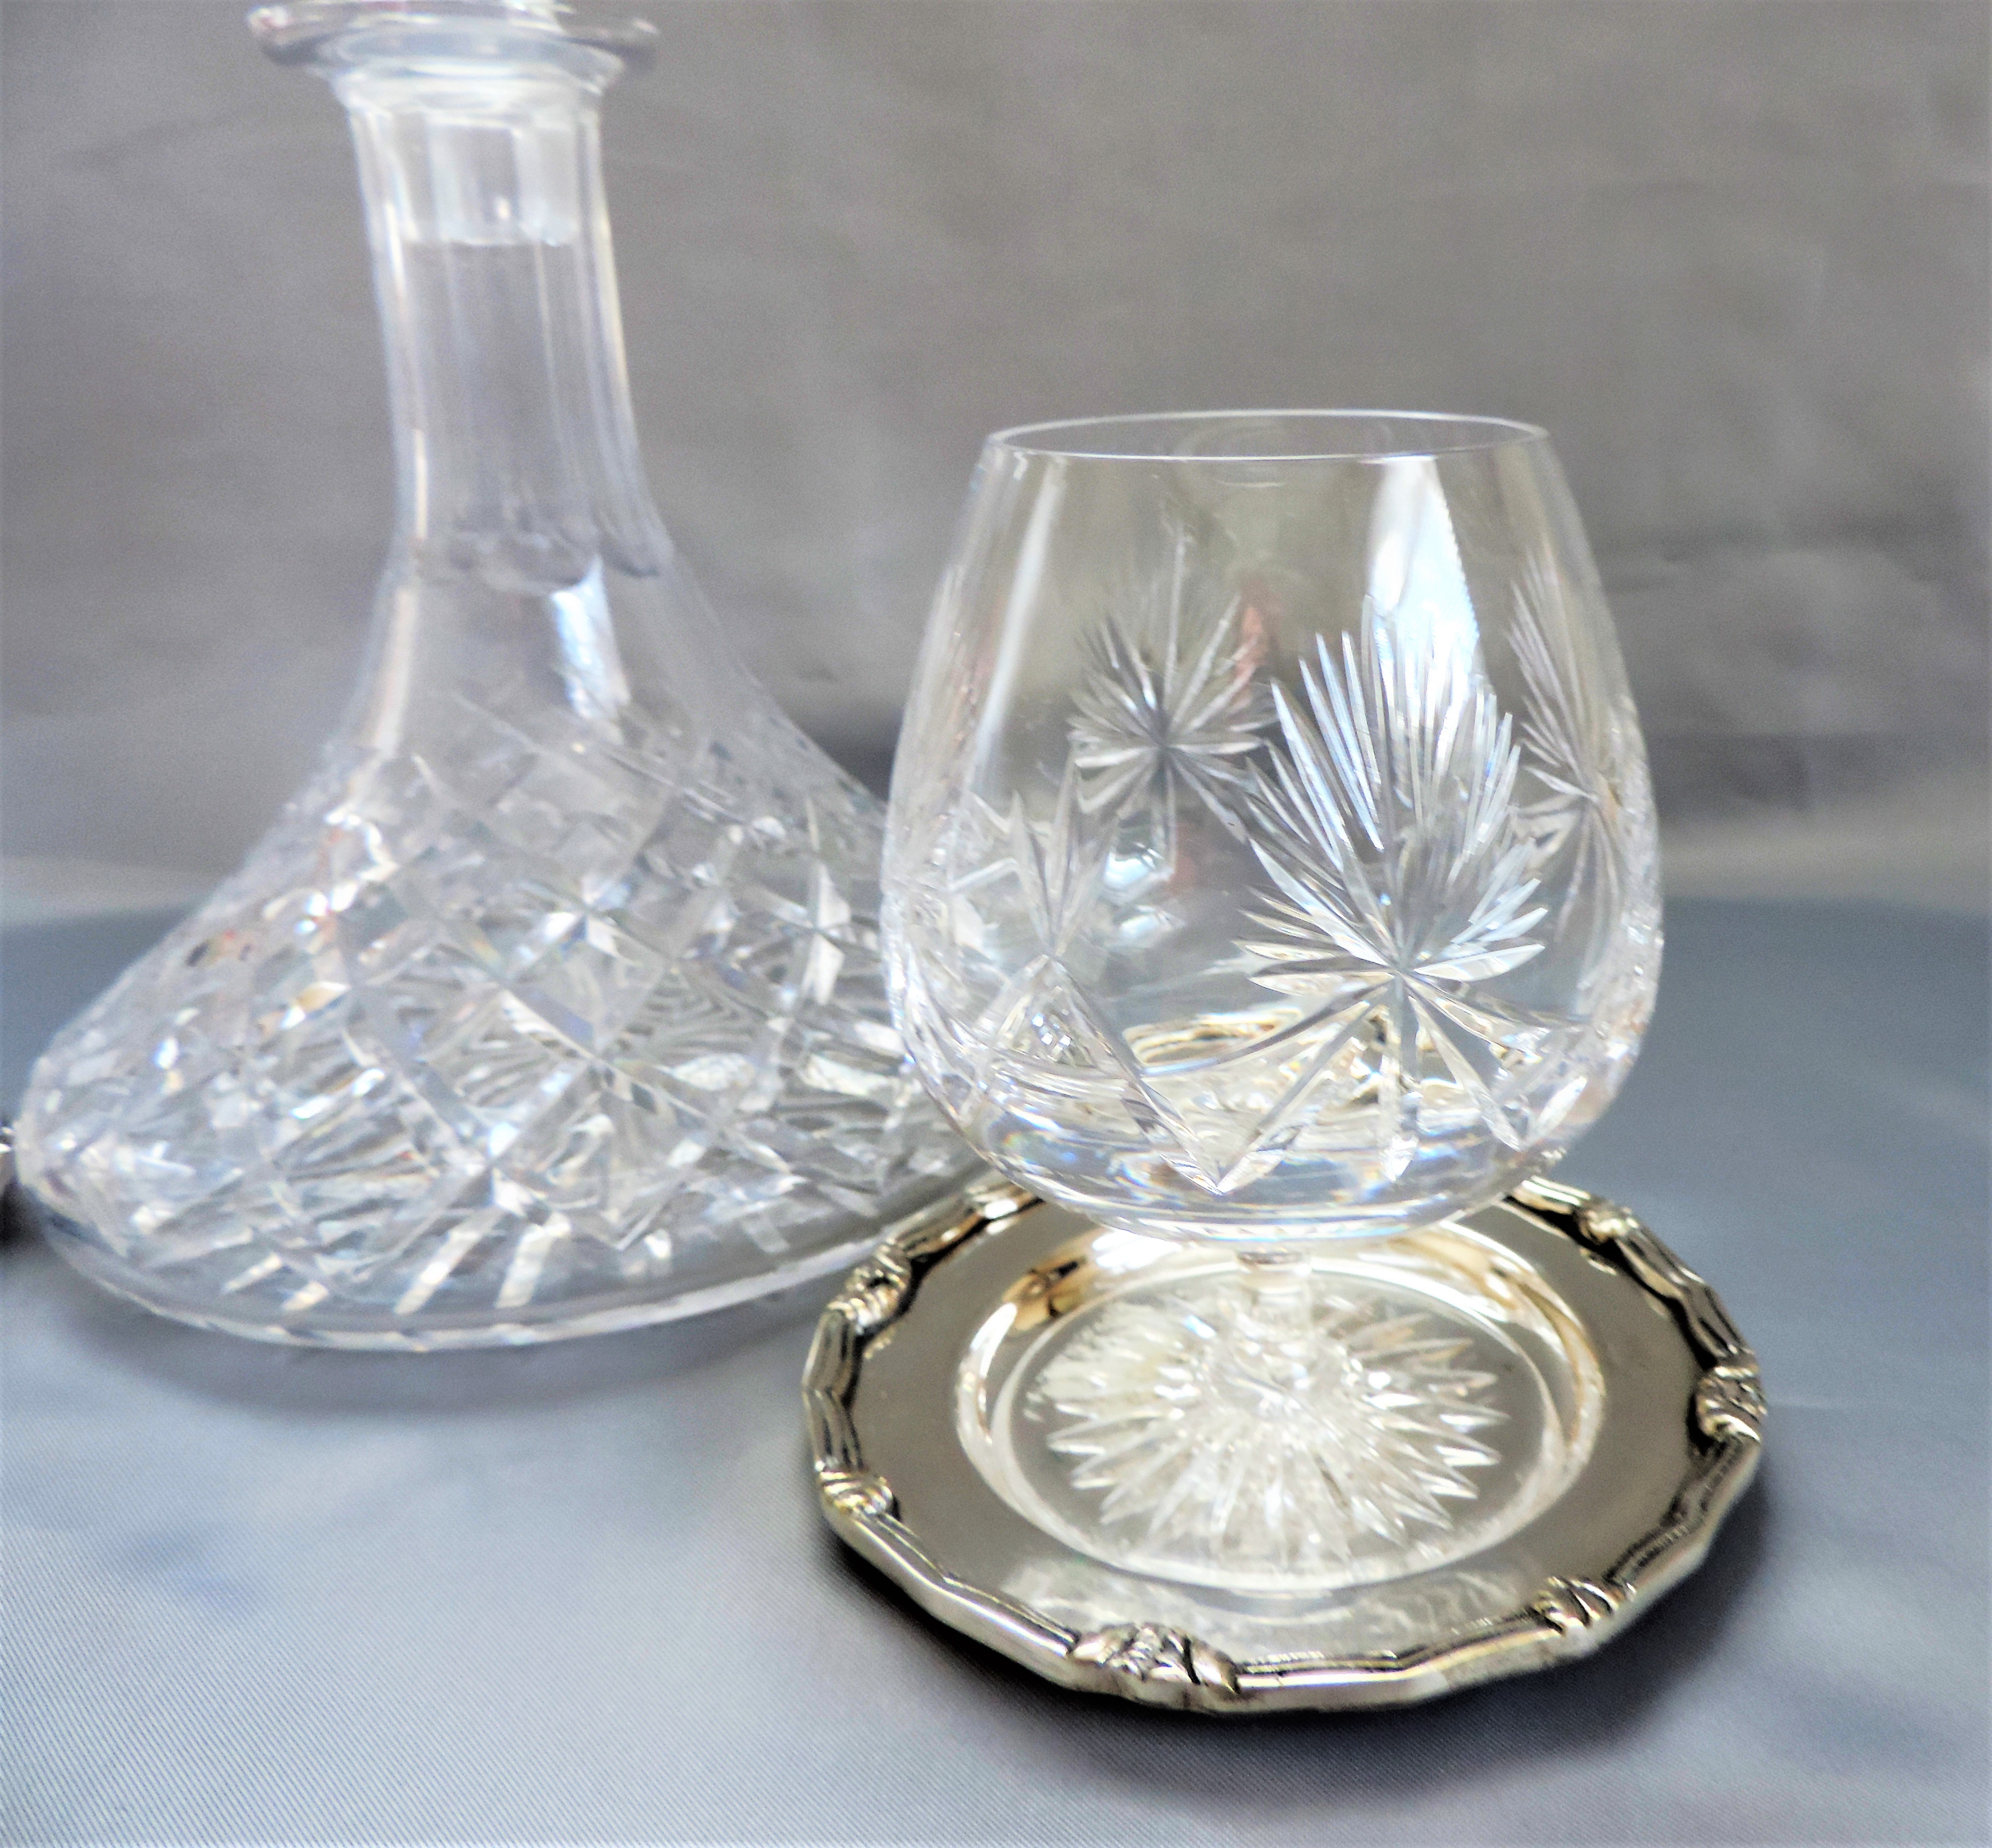 Crystal Brandy Decanter and Glasses - Image 6 of 6